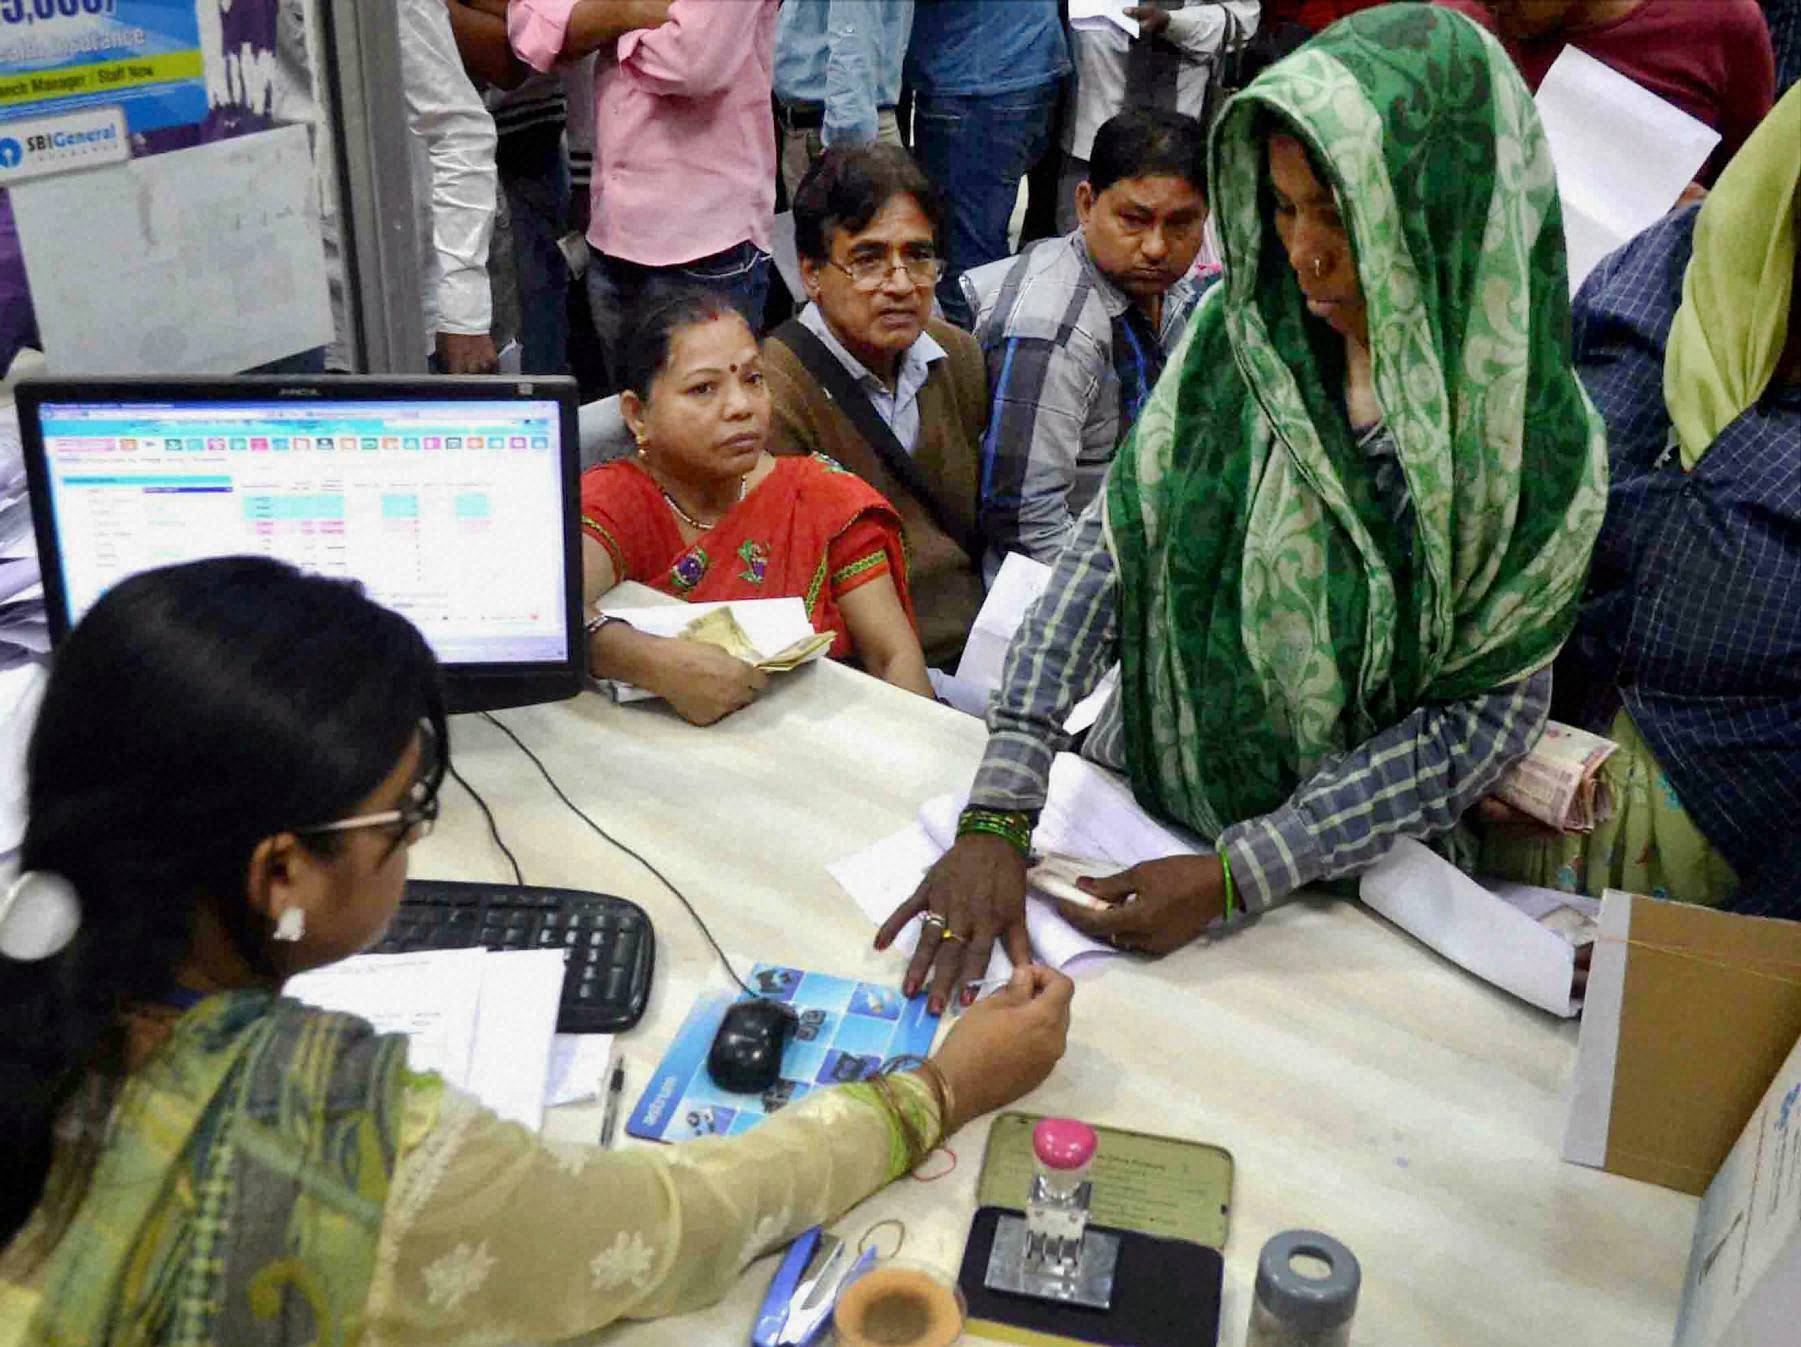 No exchange of notes for other-bank customers on Saturday